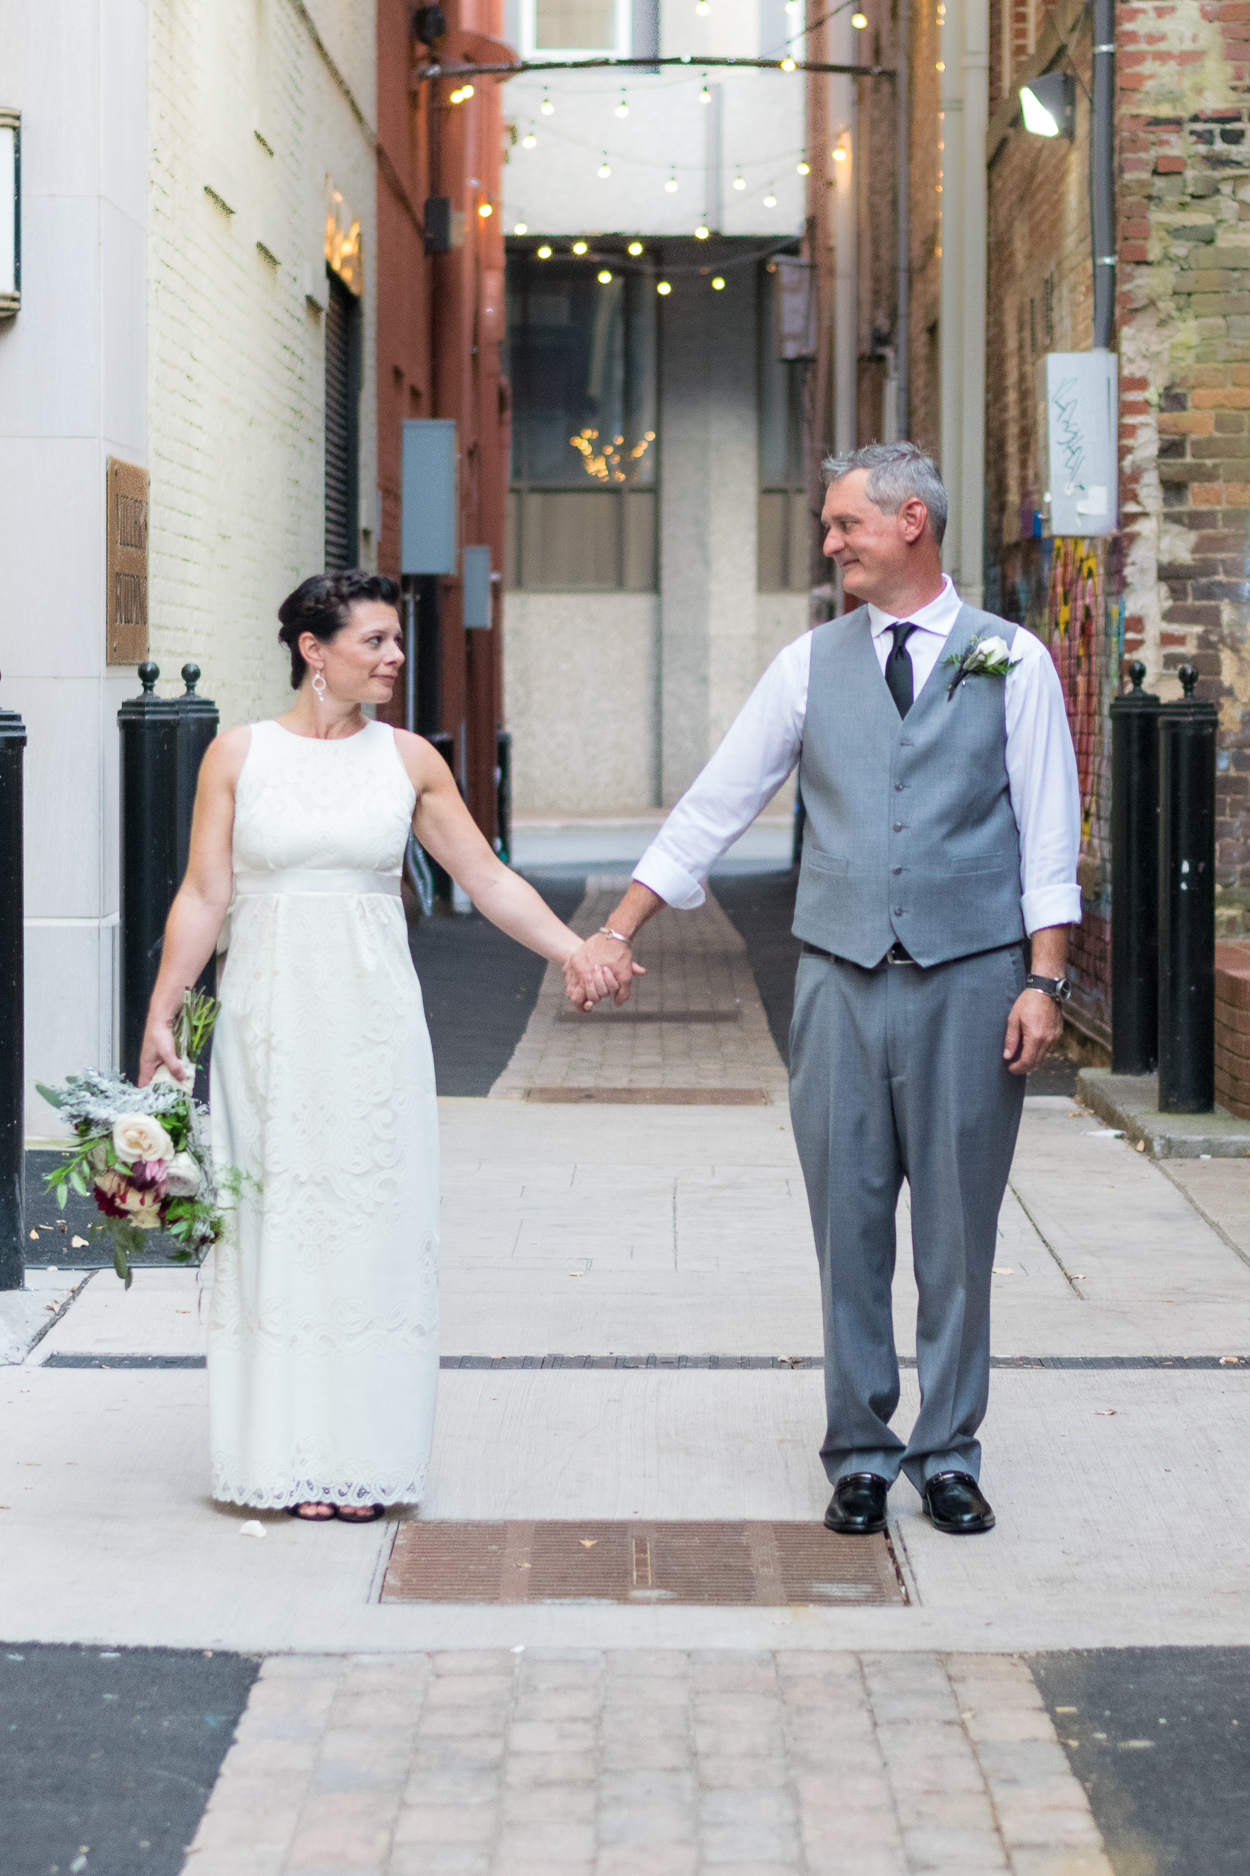 Bride and groom stand in Strong Alley behind Market Square.